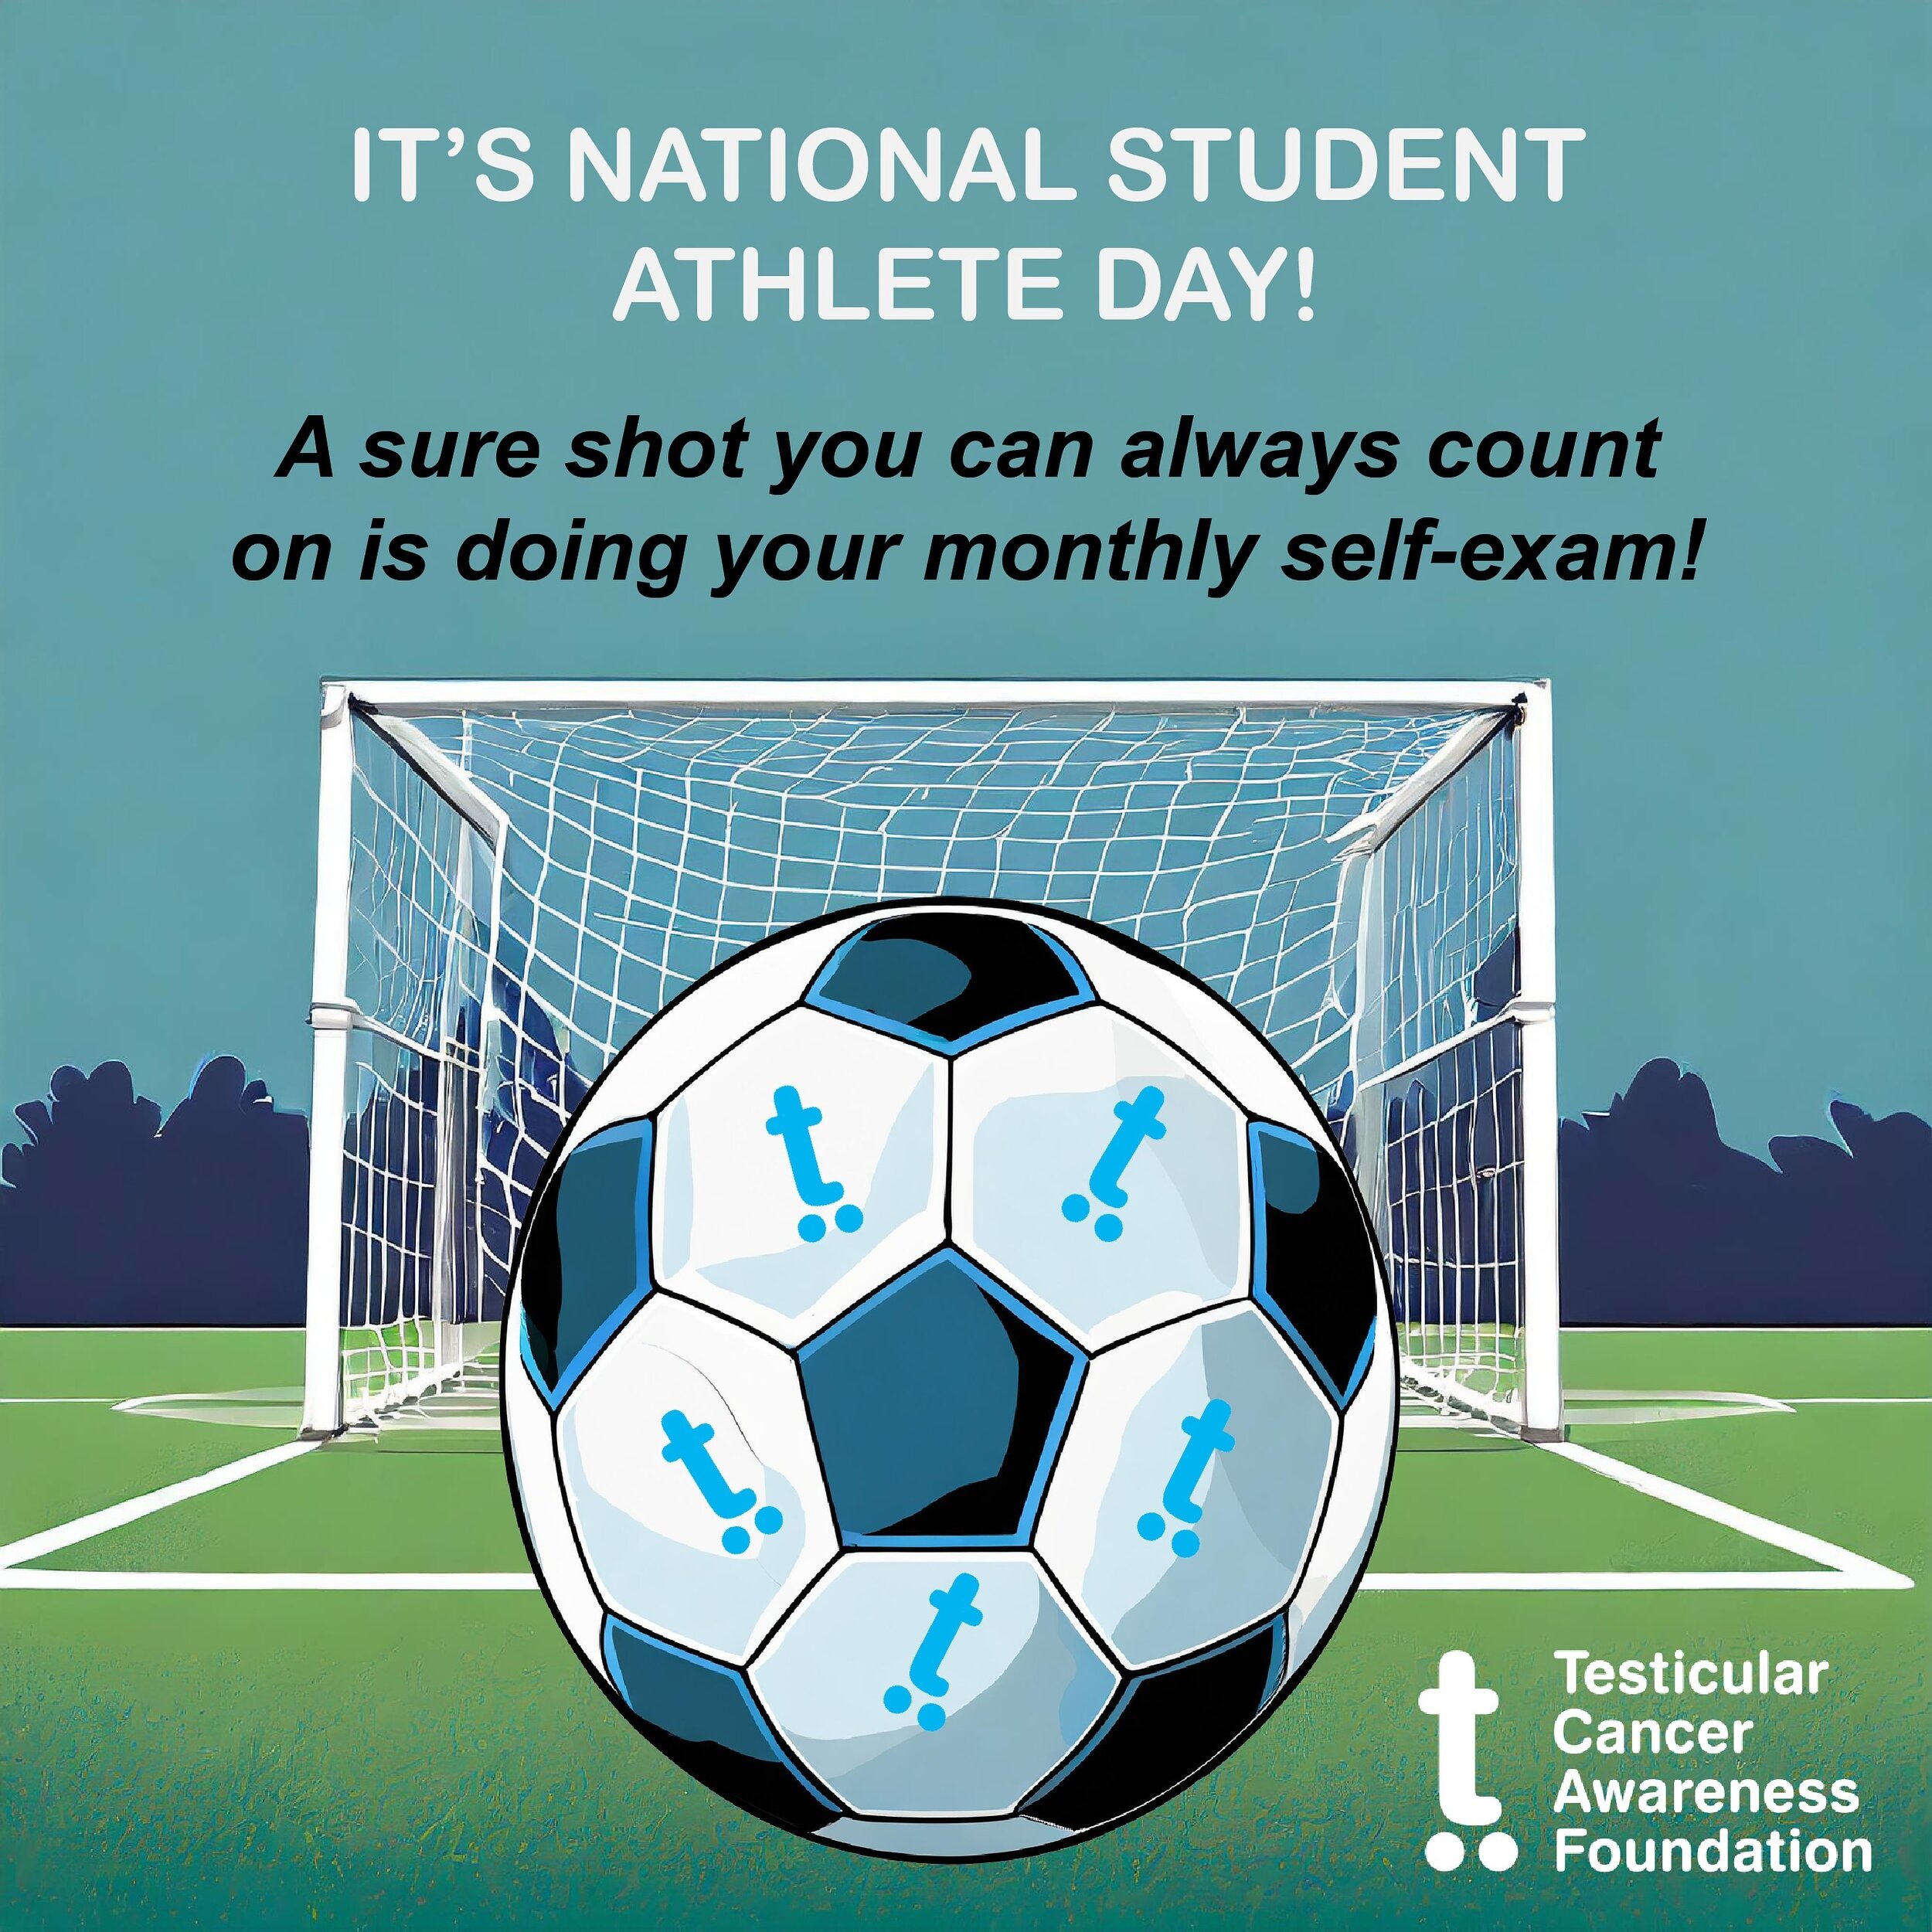 We are celebrating all student athletes today! A sure shot you can always count on is doing your monthly self-exam. Remember, early detection is key! 

#testicularcancer 
#studentathlete 
#earlydetections 
#sports 
#athletes 
#menshealth